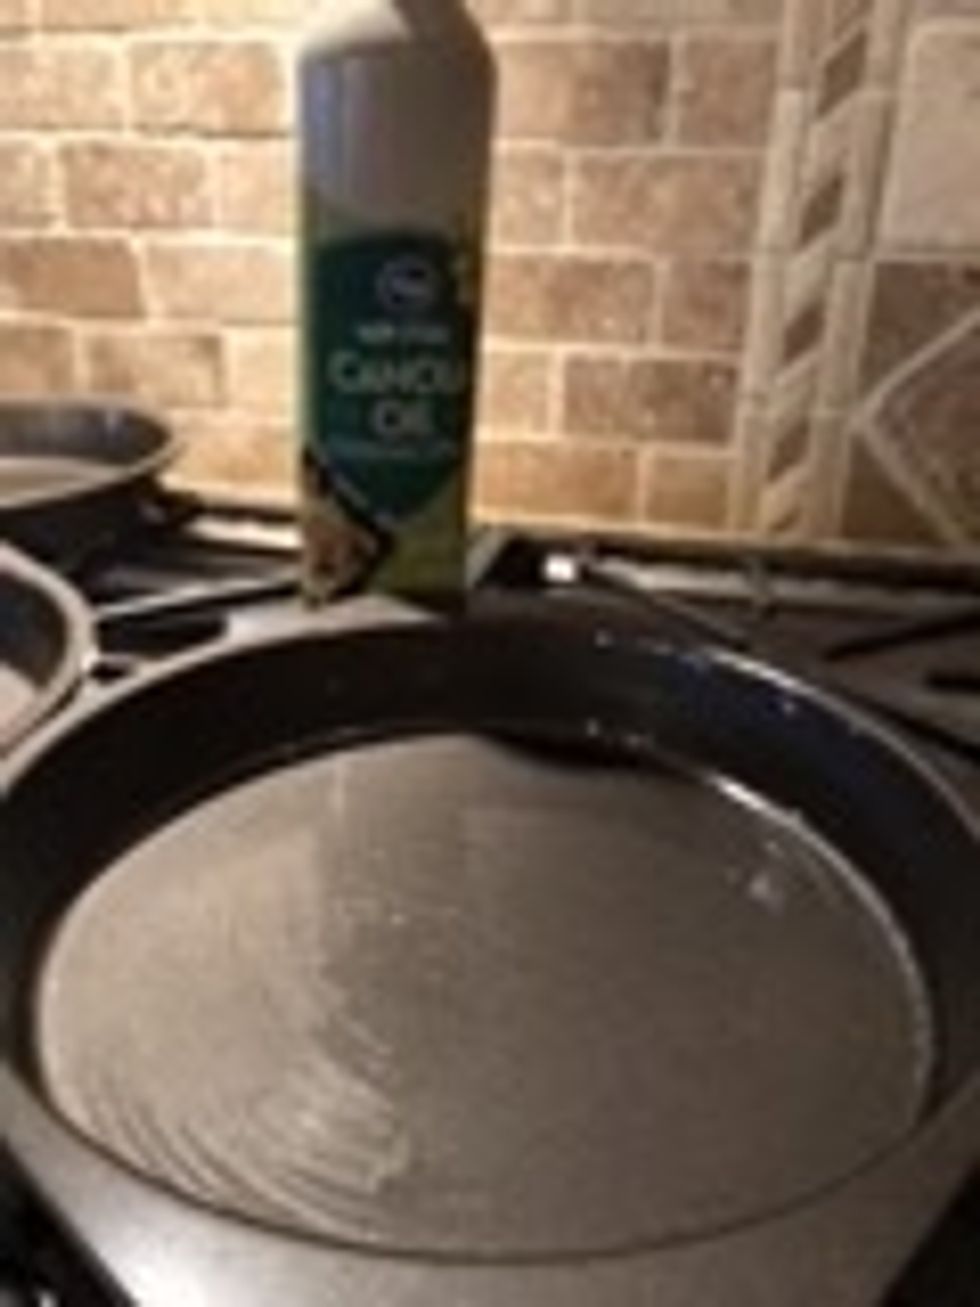 Spray cooking oil all around 3 pans.